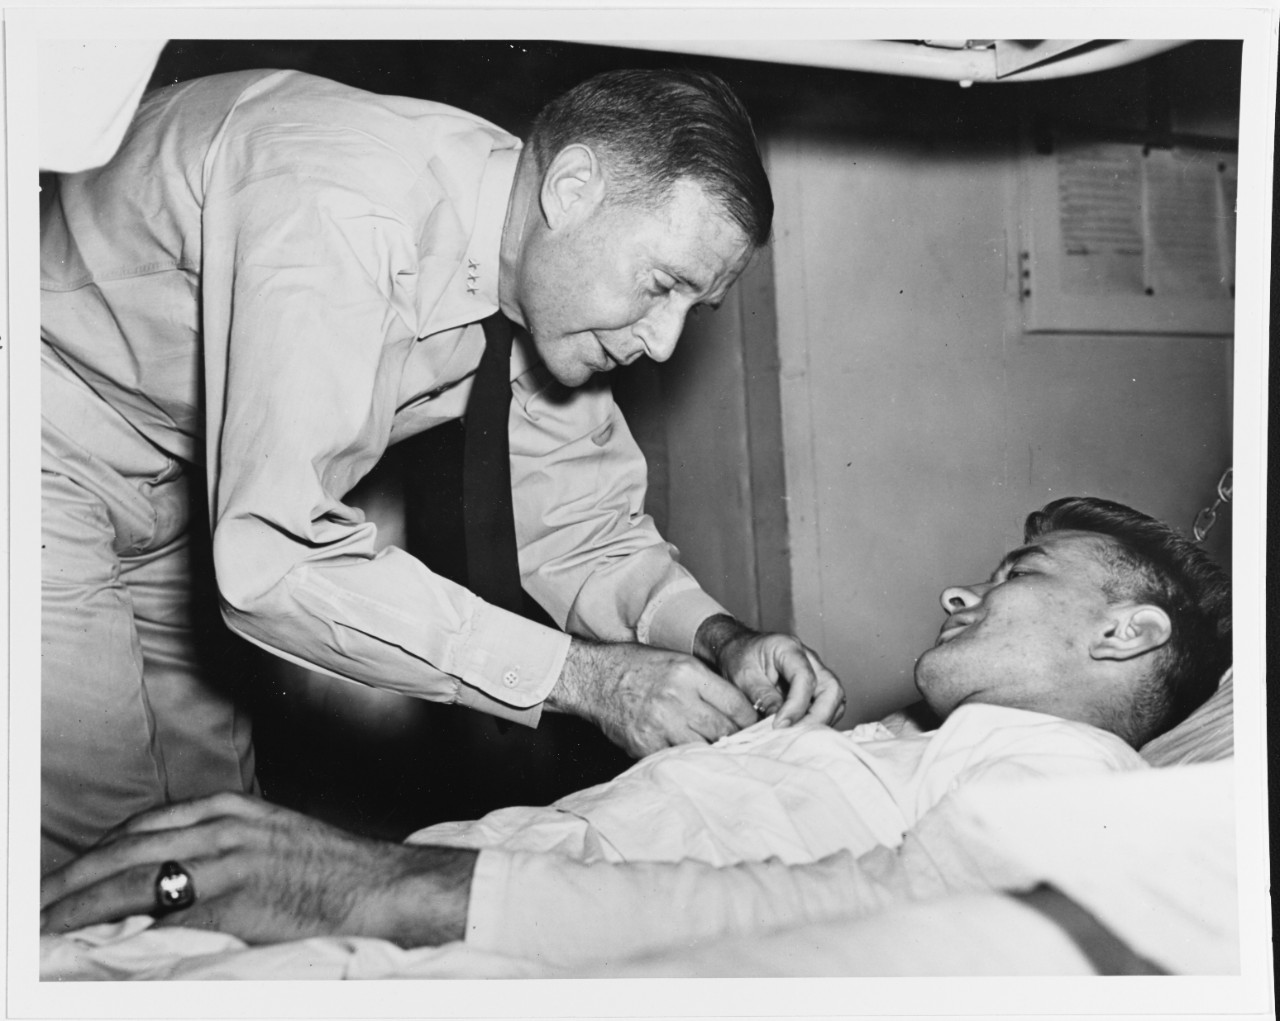 Commander, Central Pacific Force Presents the Purple Heart to Corporal John K. Galuszka, USMC, on board a hospital ship at Pearl Harbor, 17 December 1943. Corporal Galuszka had been wounded during the Gilberts Operation. Official U.S. Navy Photograph, now in the collections of the U.S. National Archives.